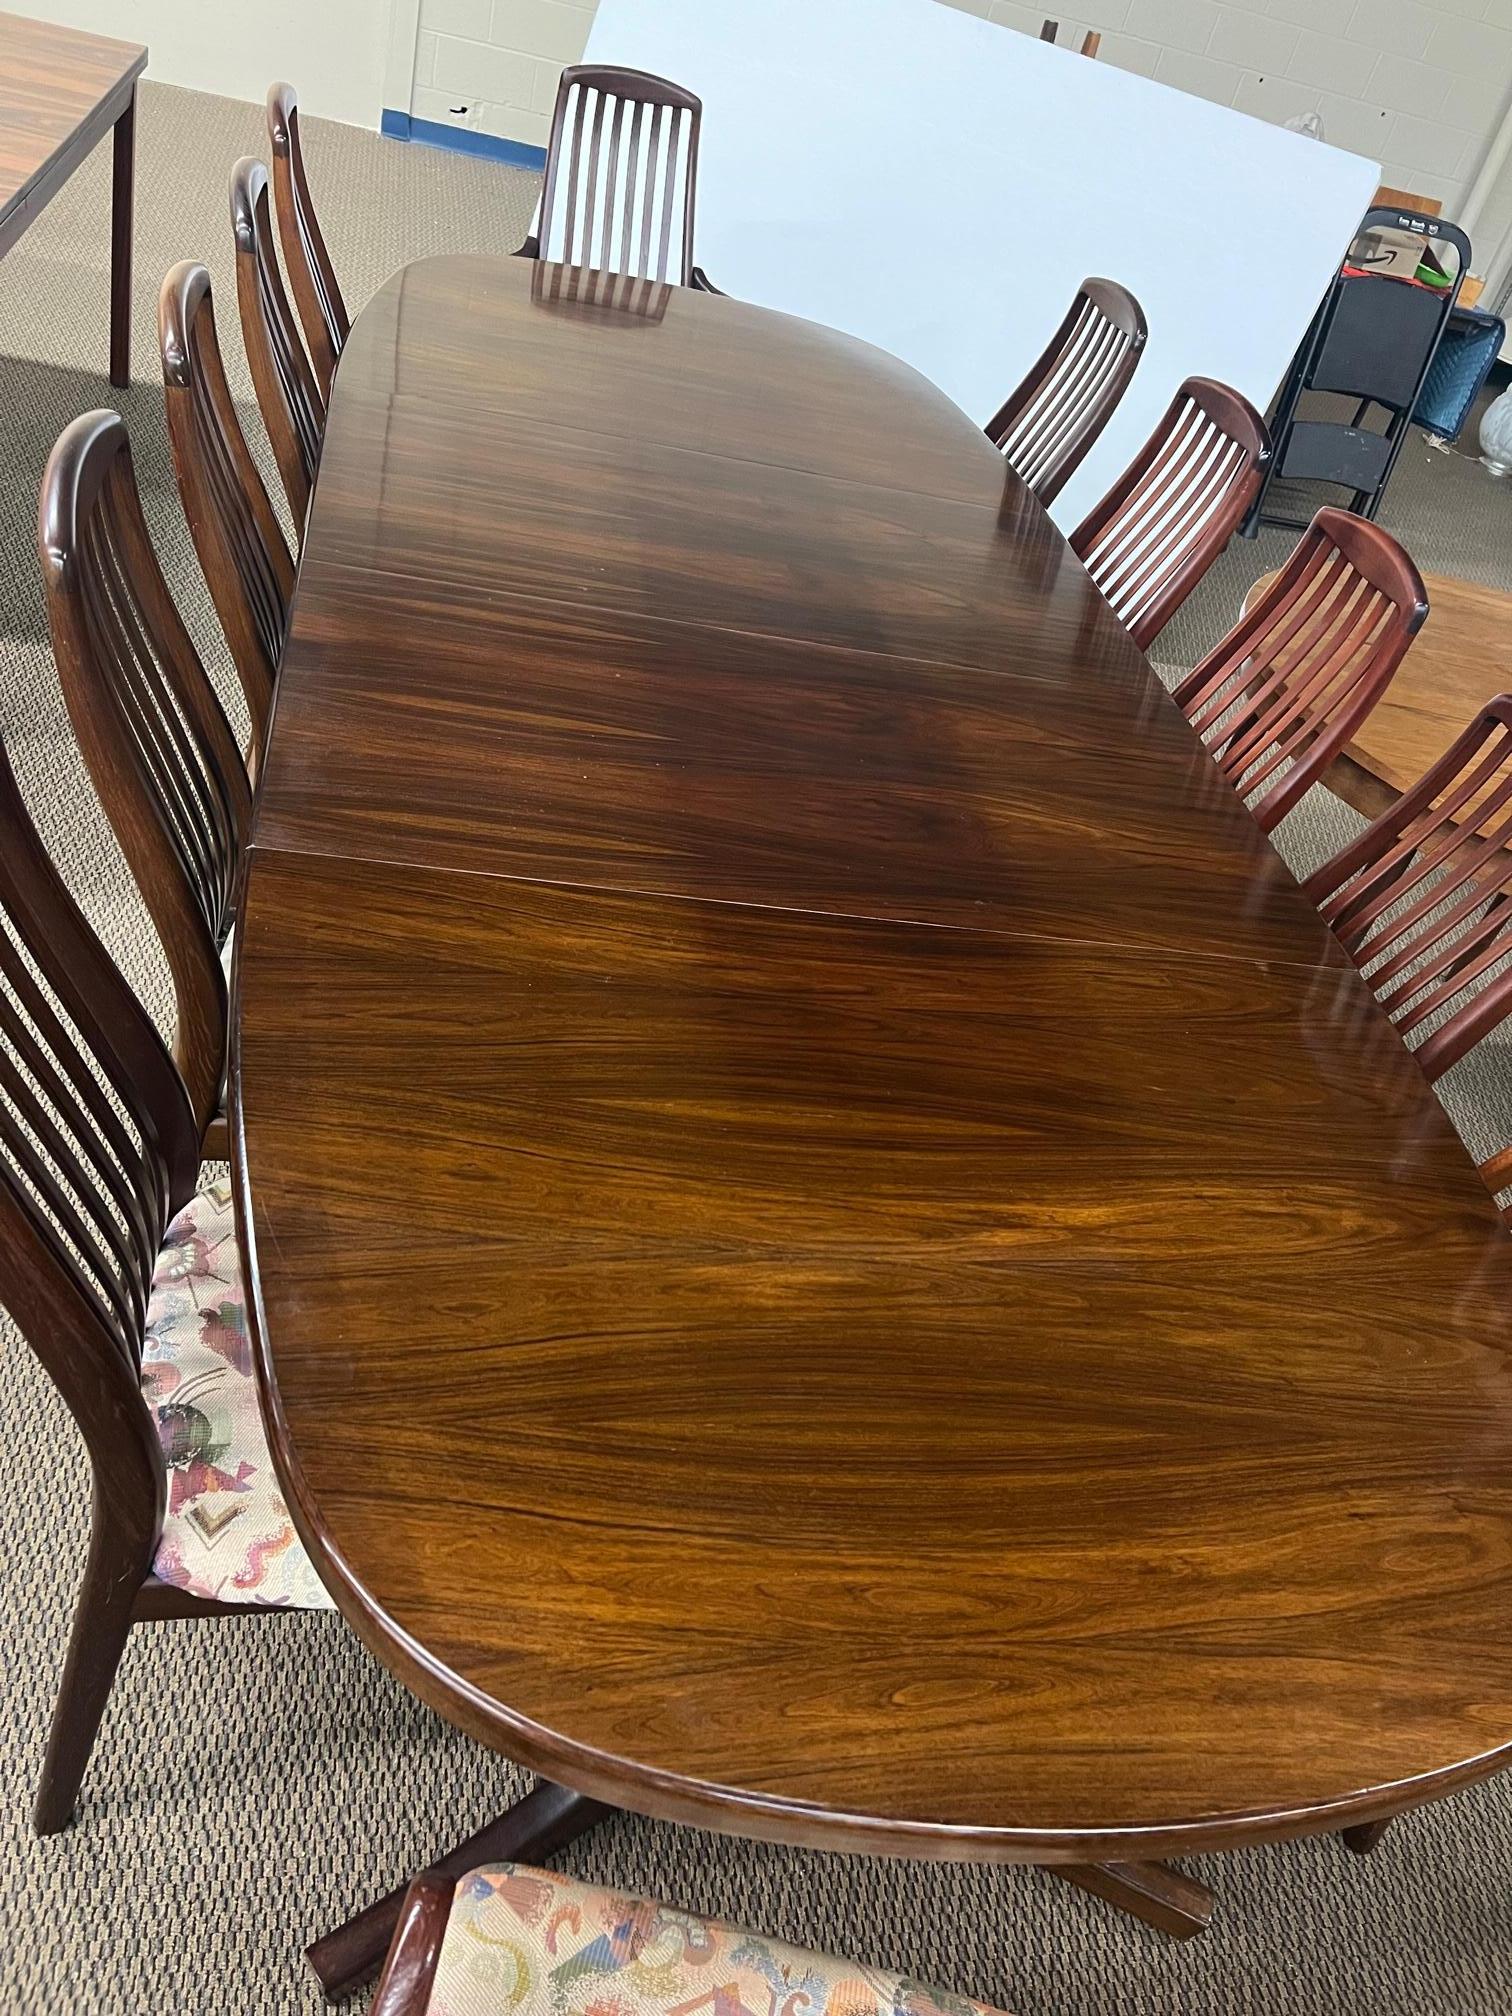 Midcentury Danish Modern Large Rosewood Dining Table with 2 Extension Leaves 5